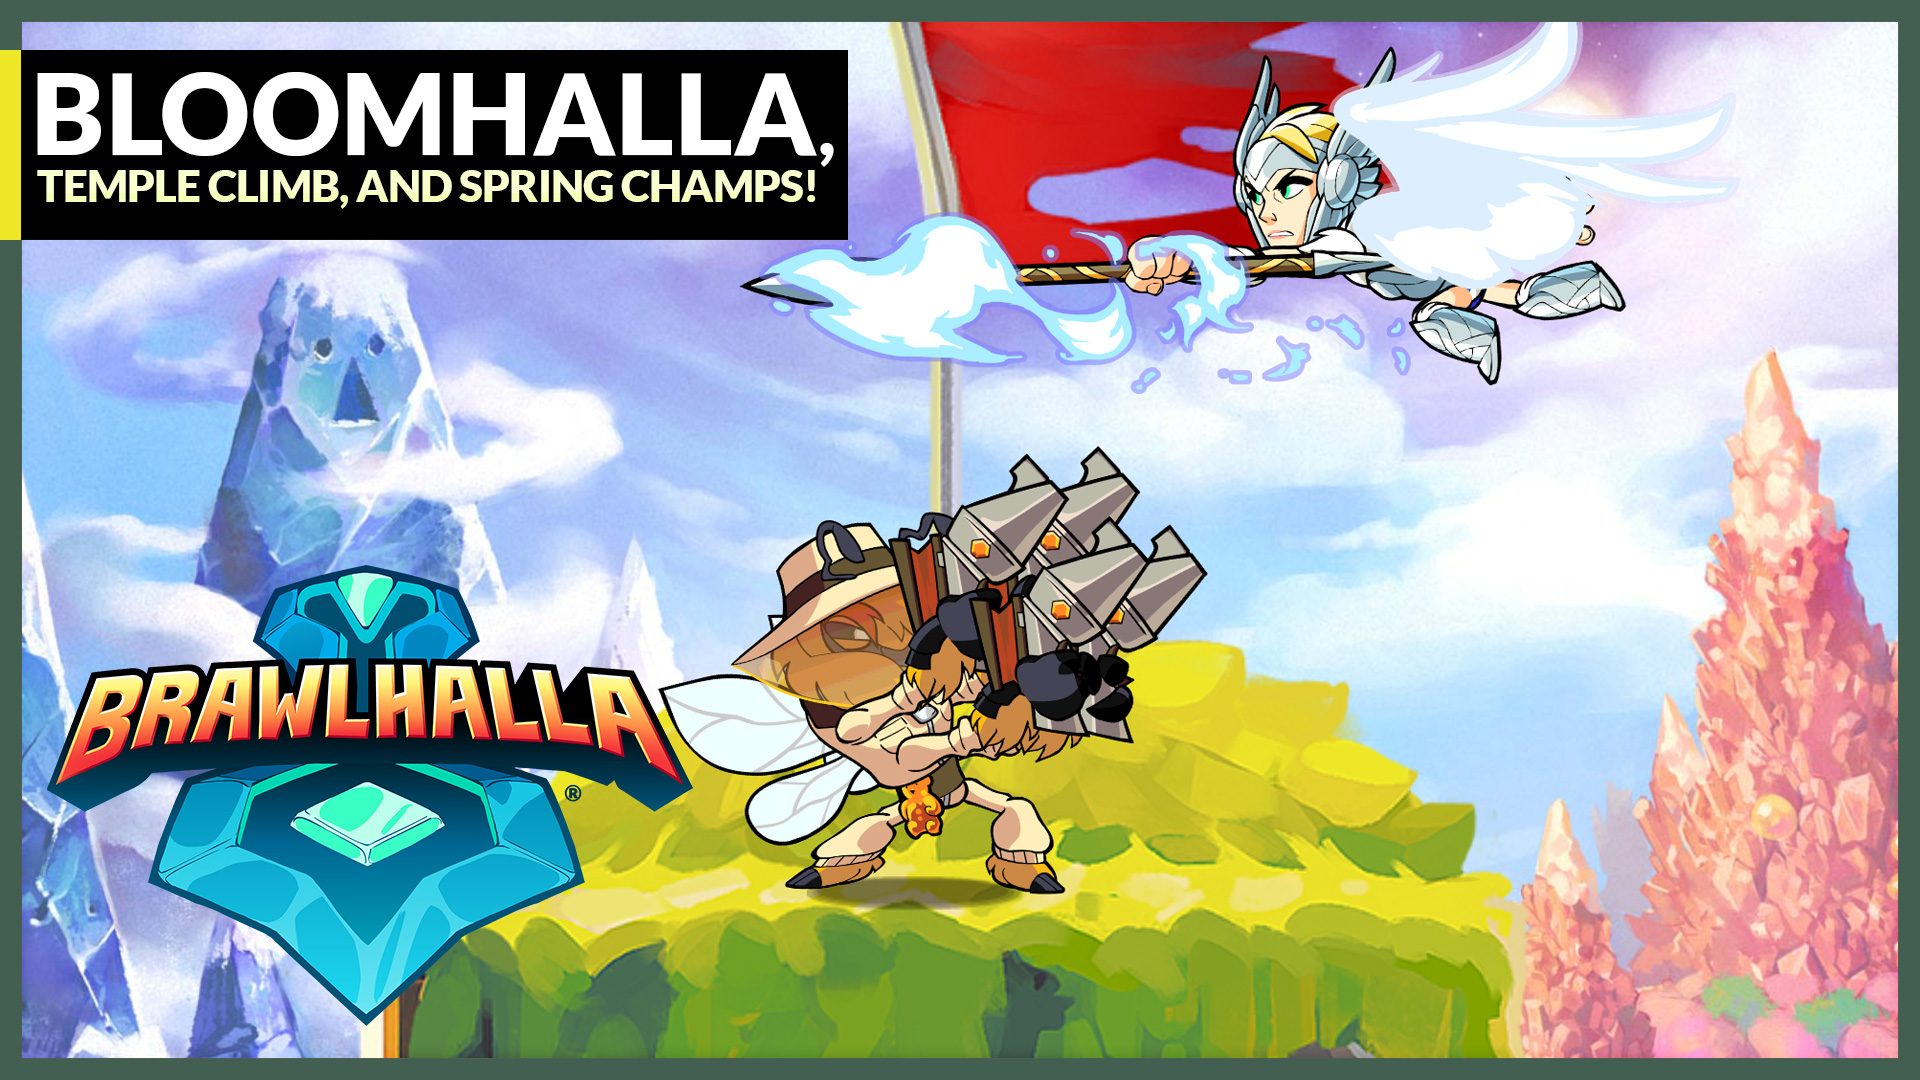 Bloomhalla, Temple Climb, and Spring Champs!